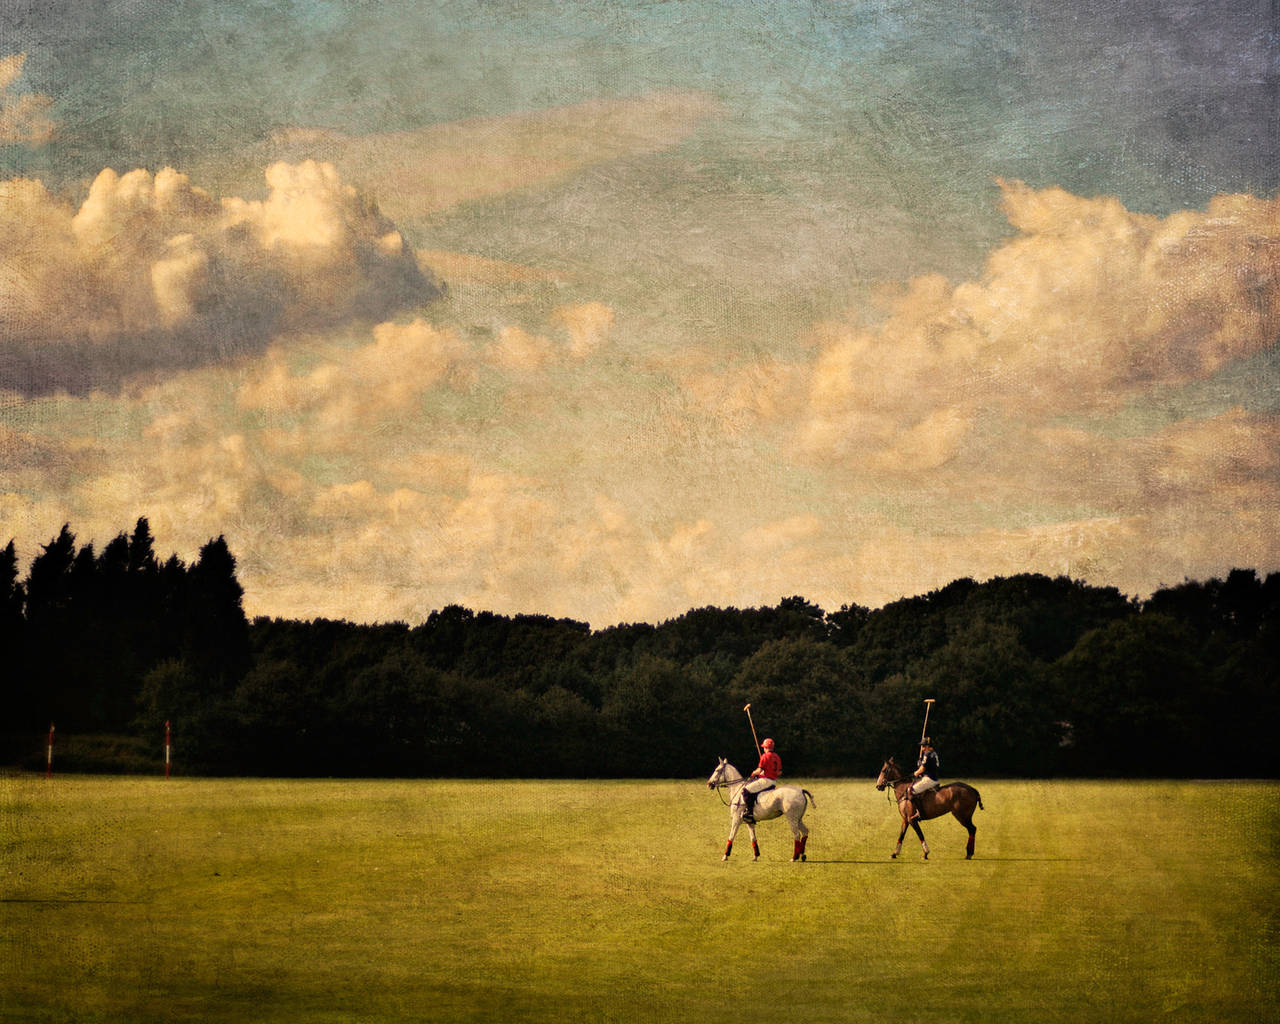 Pete Kelly Landscape Photograph - Polo Field, Cheshire, UK